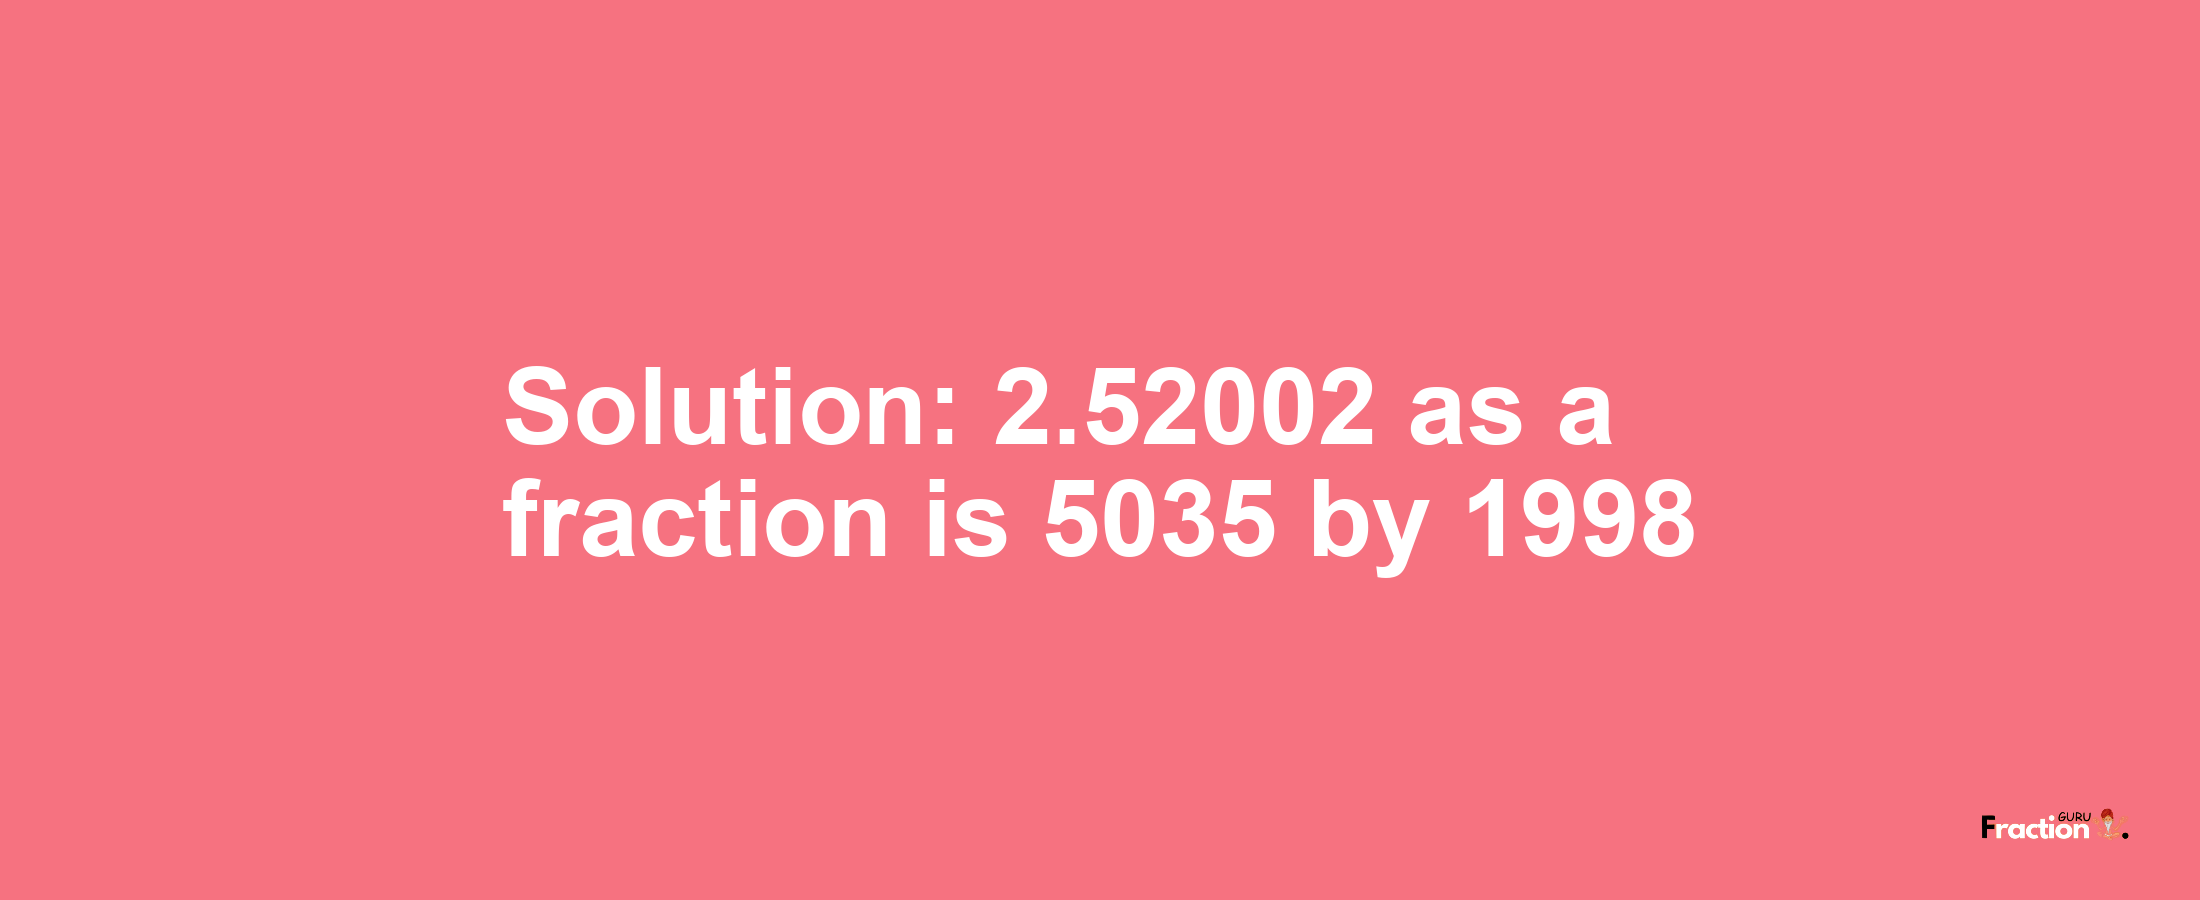 Solution:2.52002 as a fraction is 5035/1998